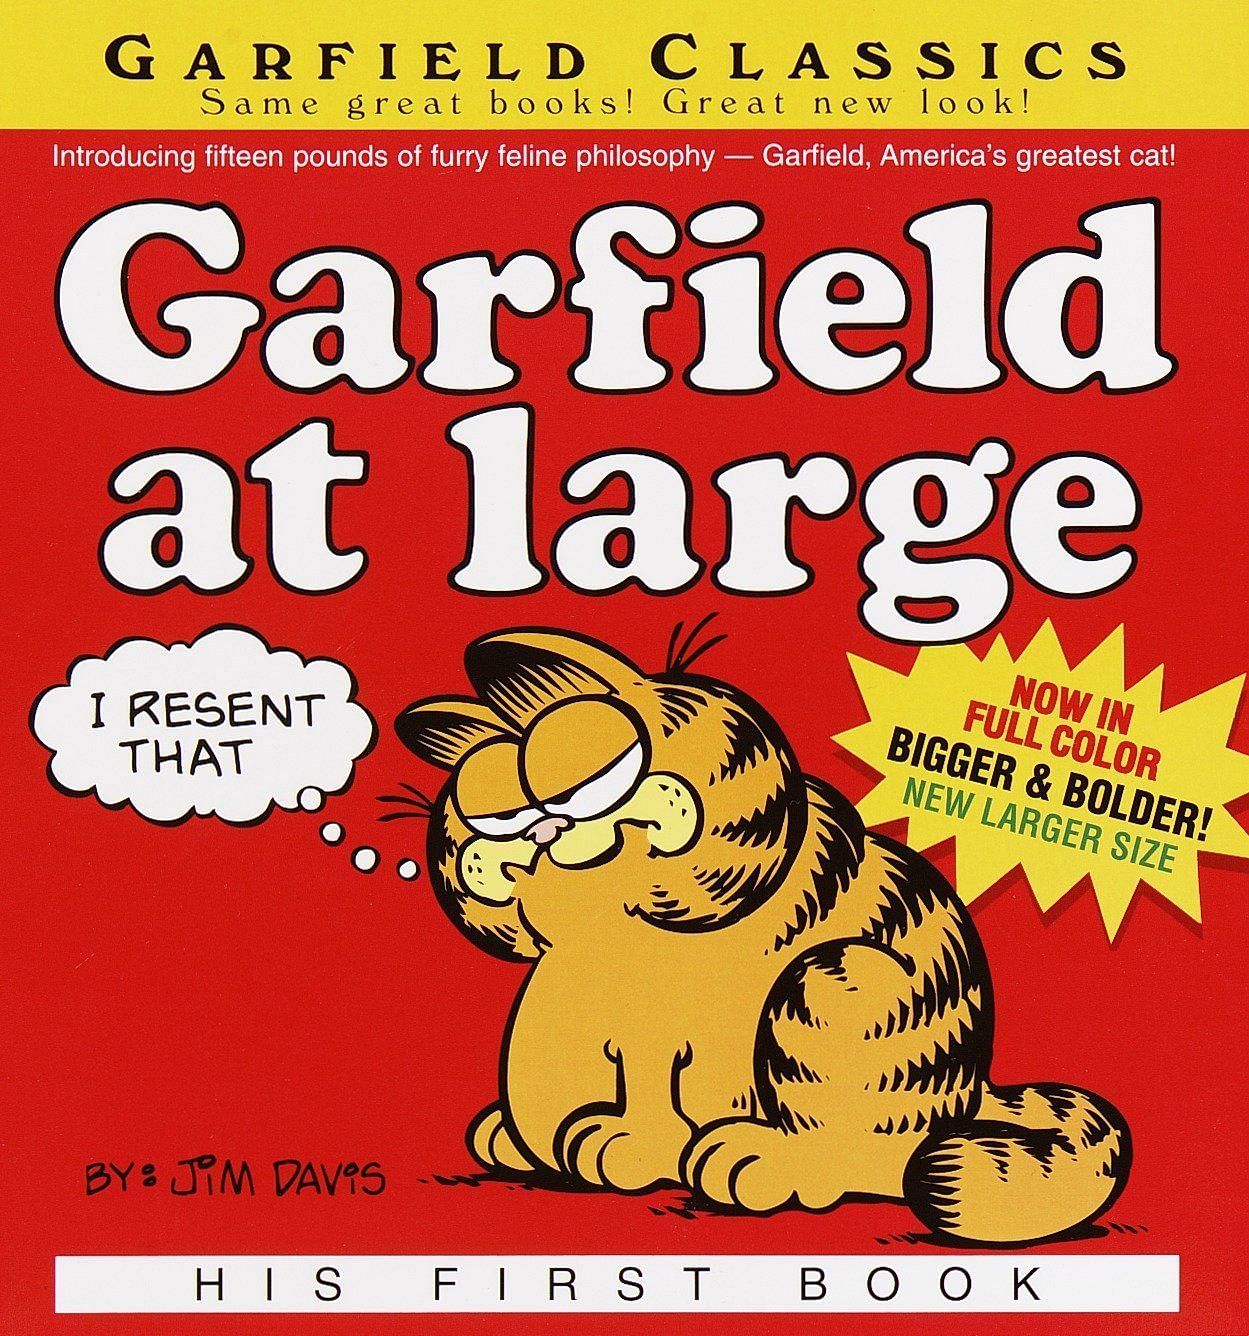 The first book, Garfield at Large (Image via Amazon.com)